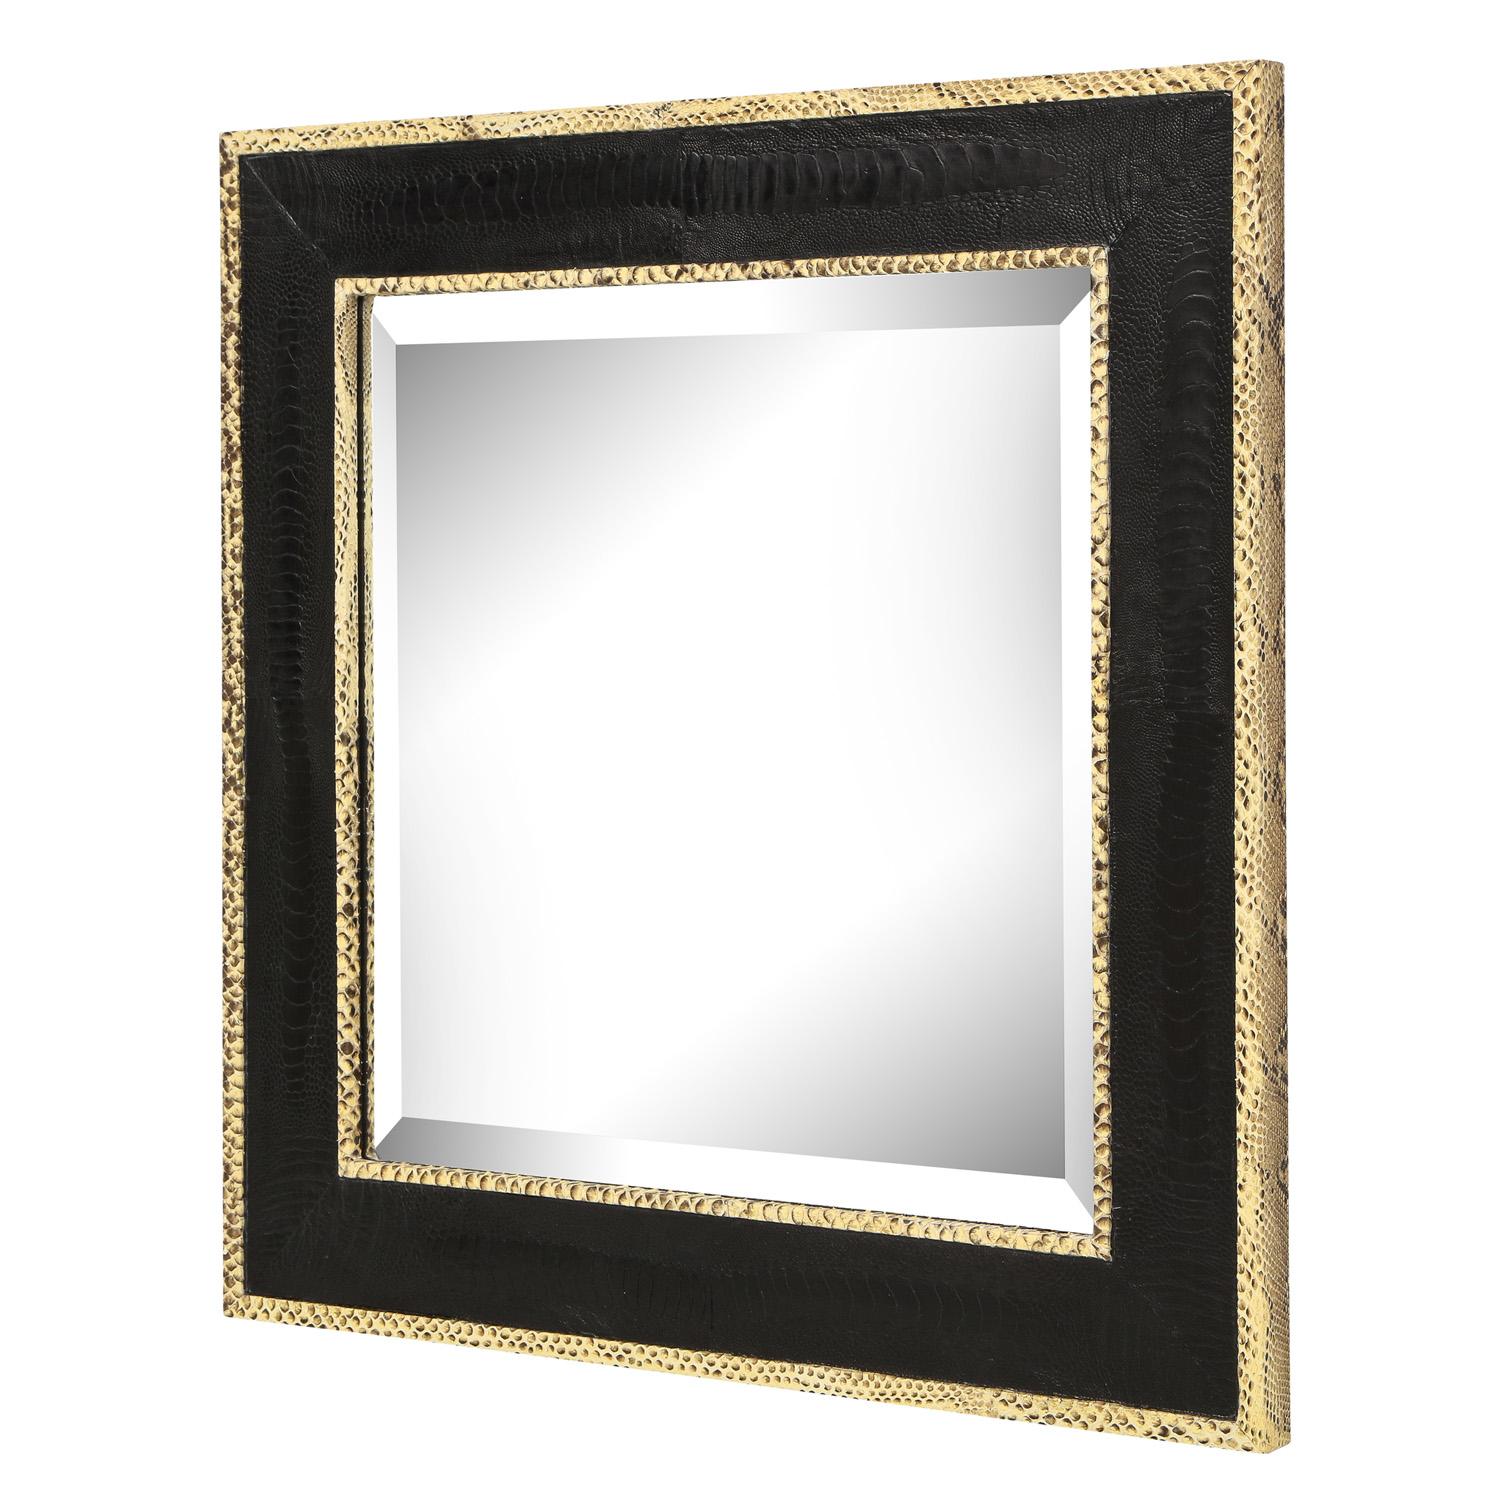 Beautifully crafted mirror with frame in black lizard with interior and exterior edges wrapped in python with beveled mirror by Karl Springer, American 1980's. This mirror exemplified the superlative craftsmanship that made Karl Springer famous.